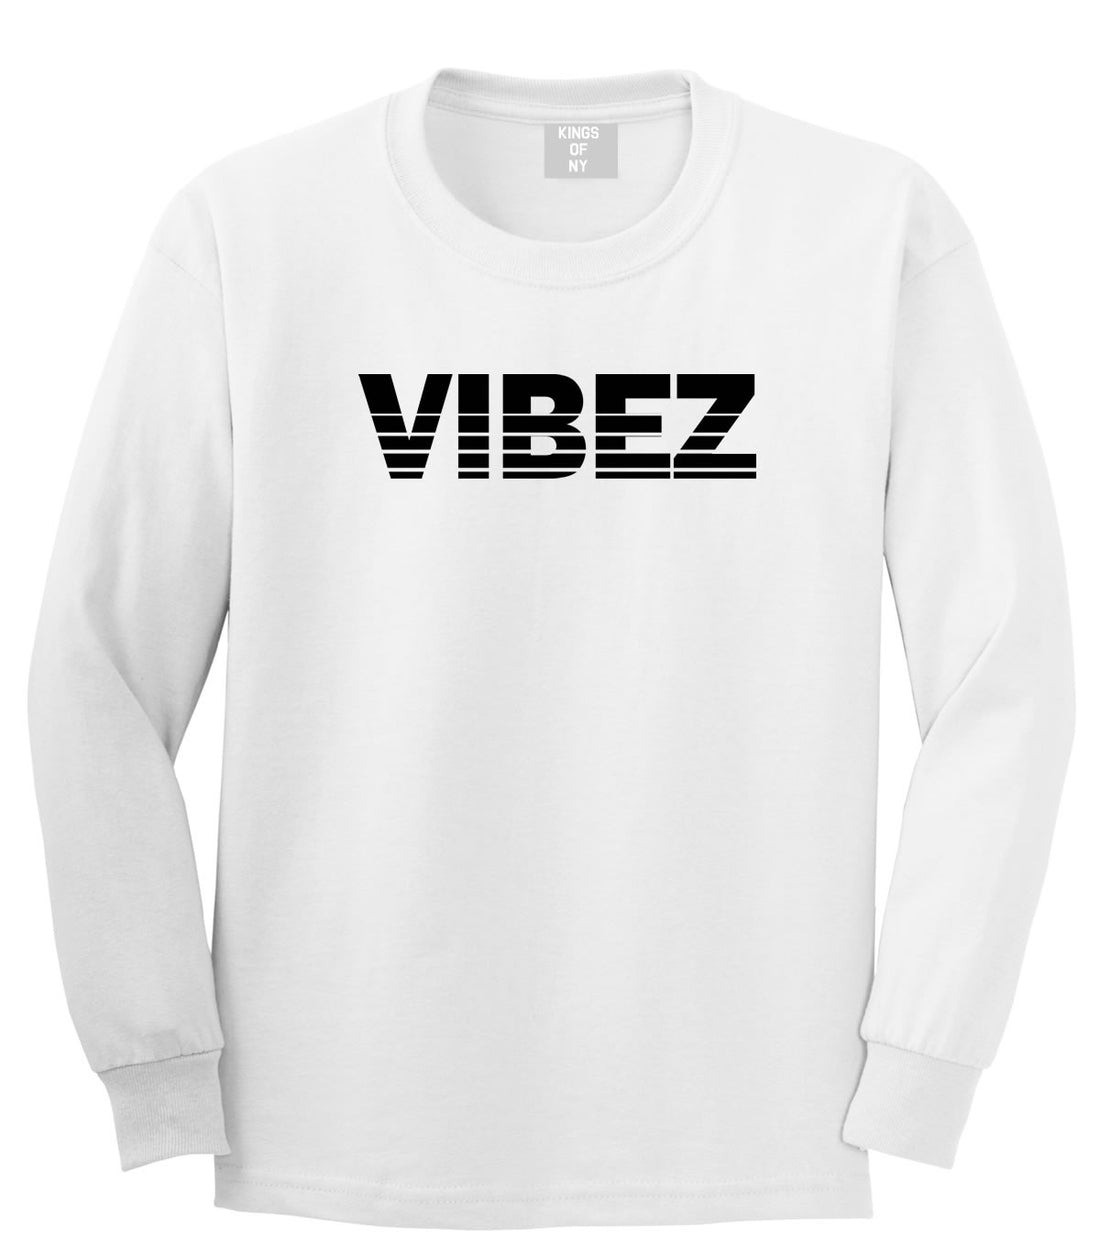 VIBEZ Racing Style Boys Kids Long Sleeve T-Shirt in White by Kings Of NY